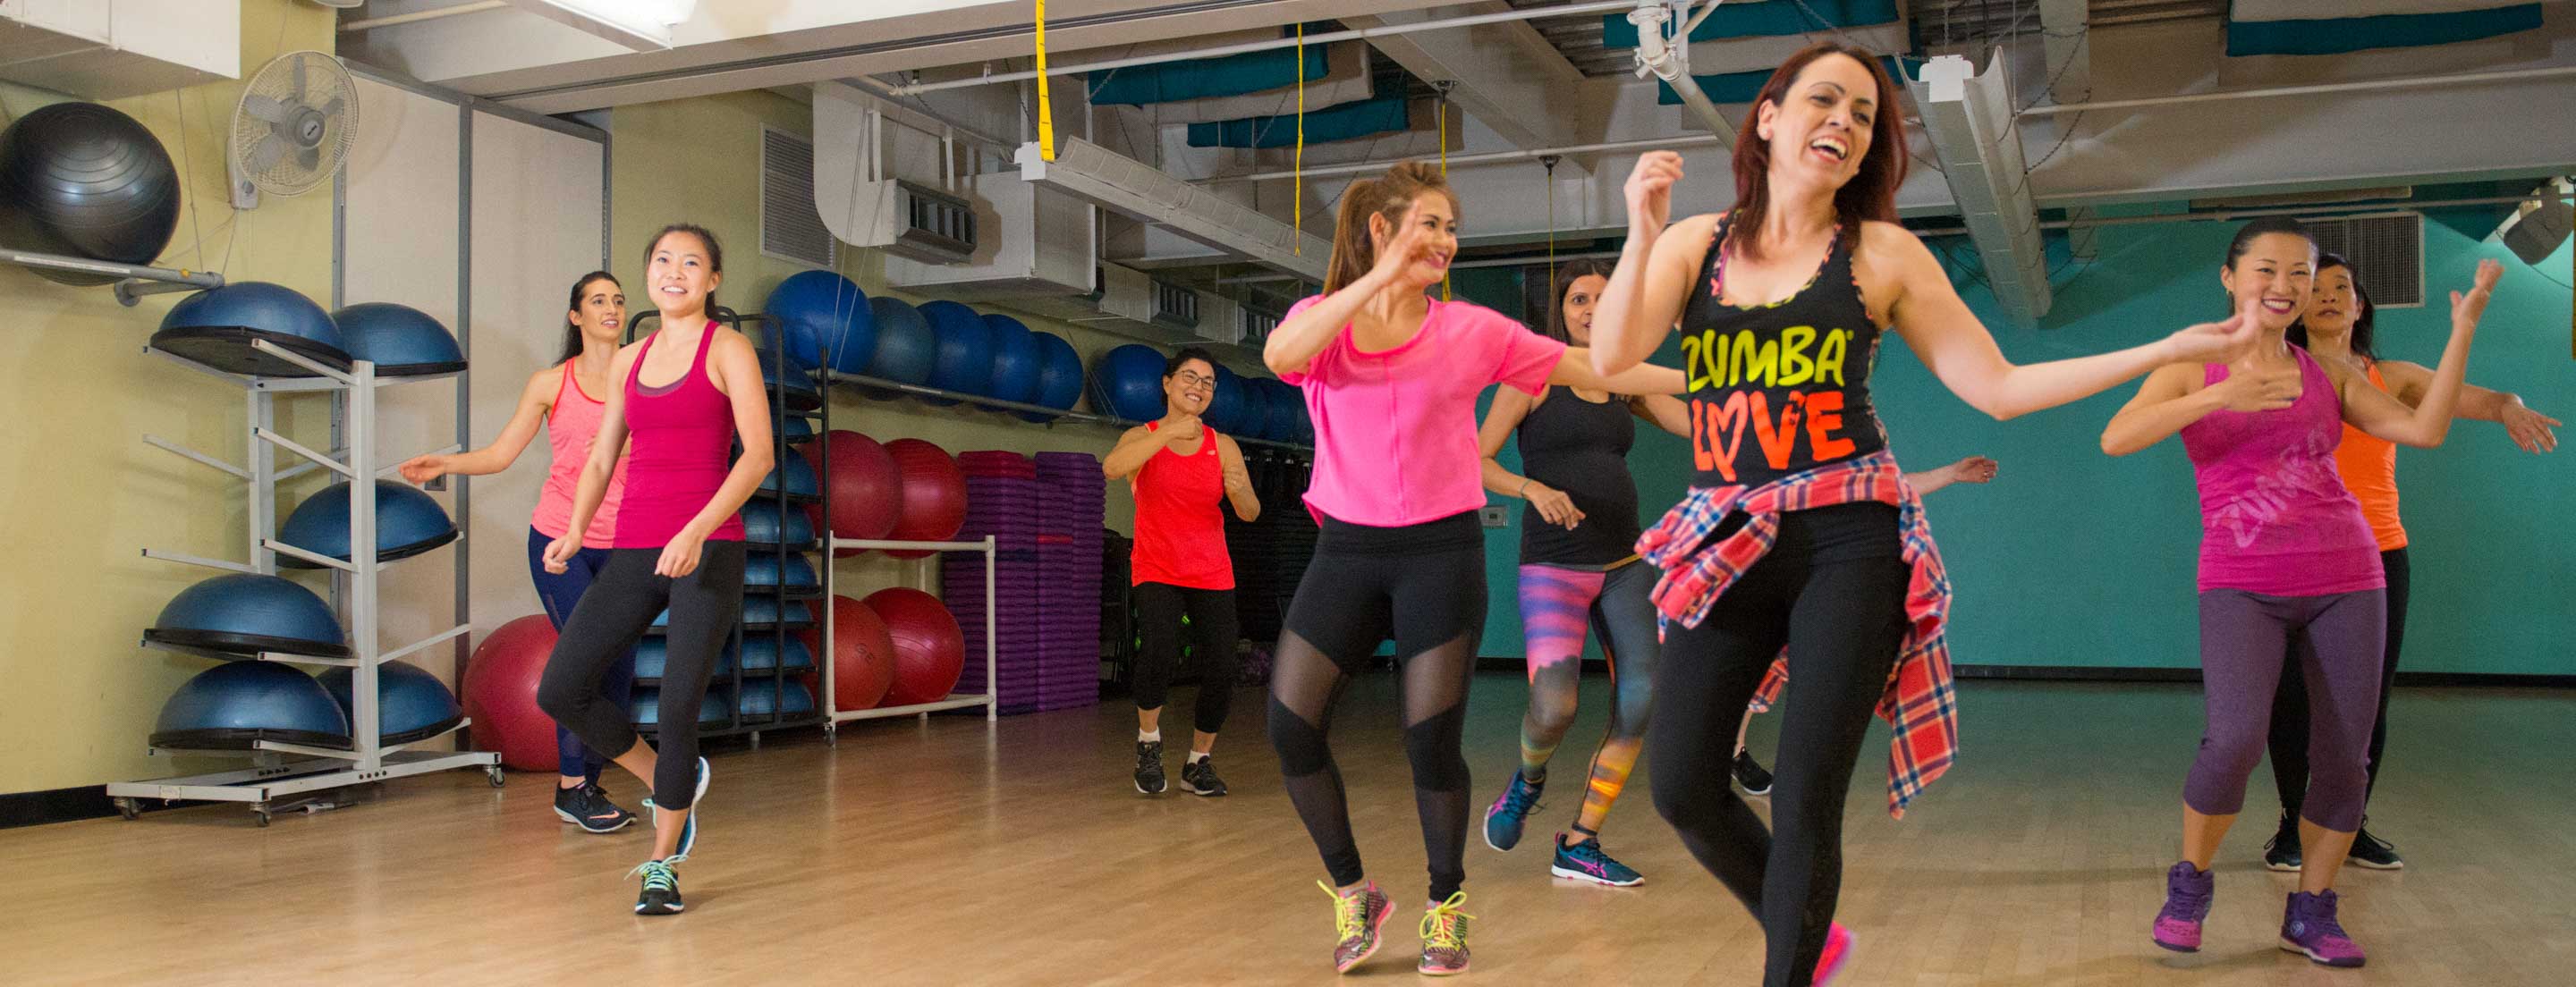 women in a group exercise class